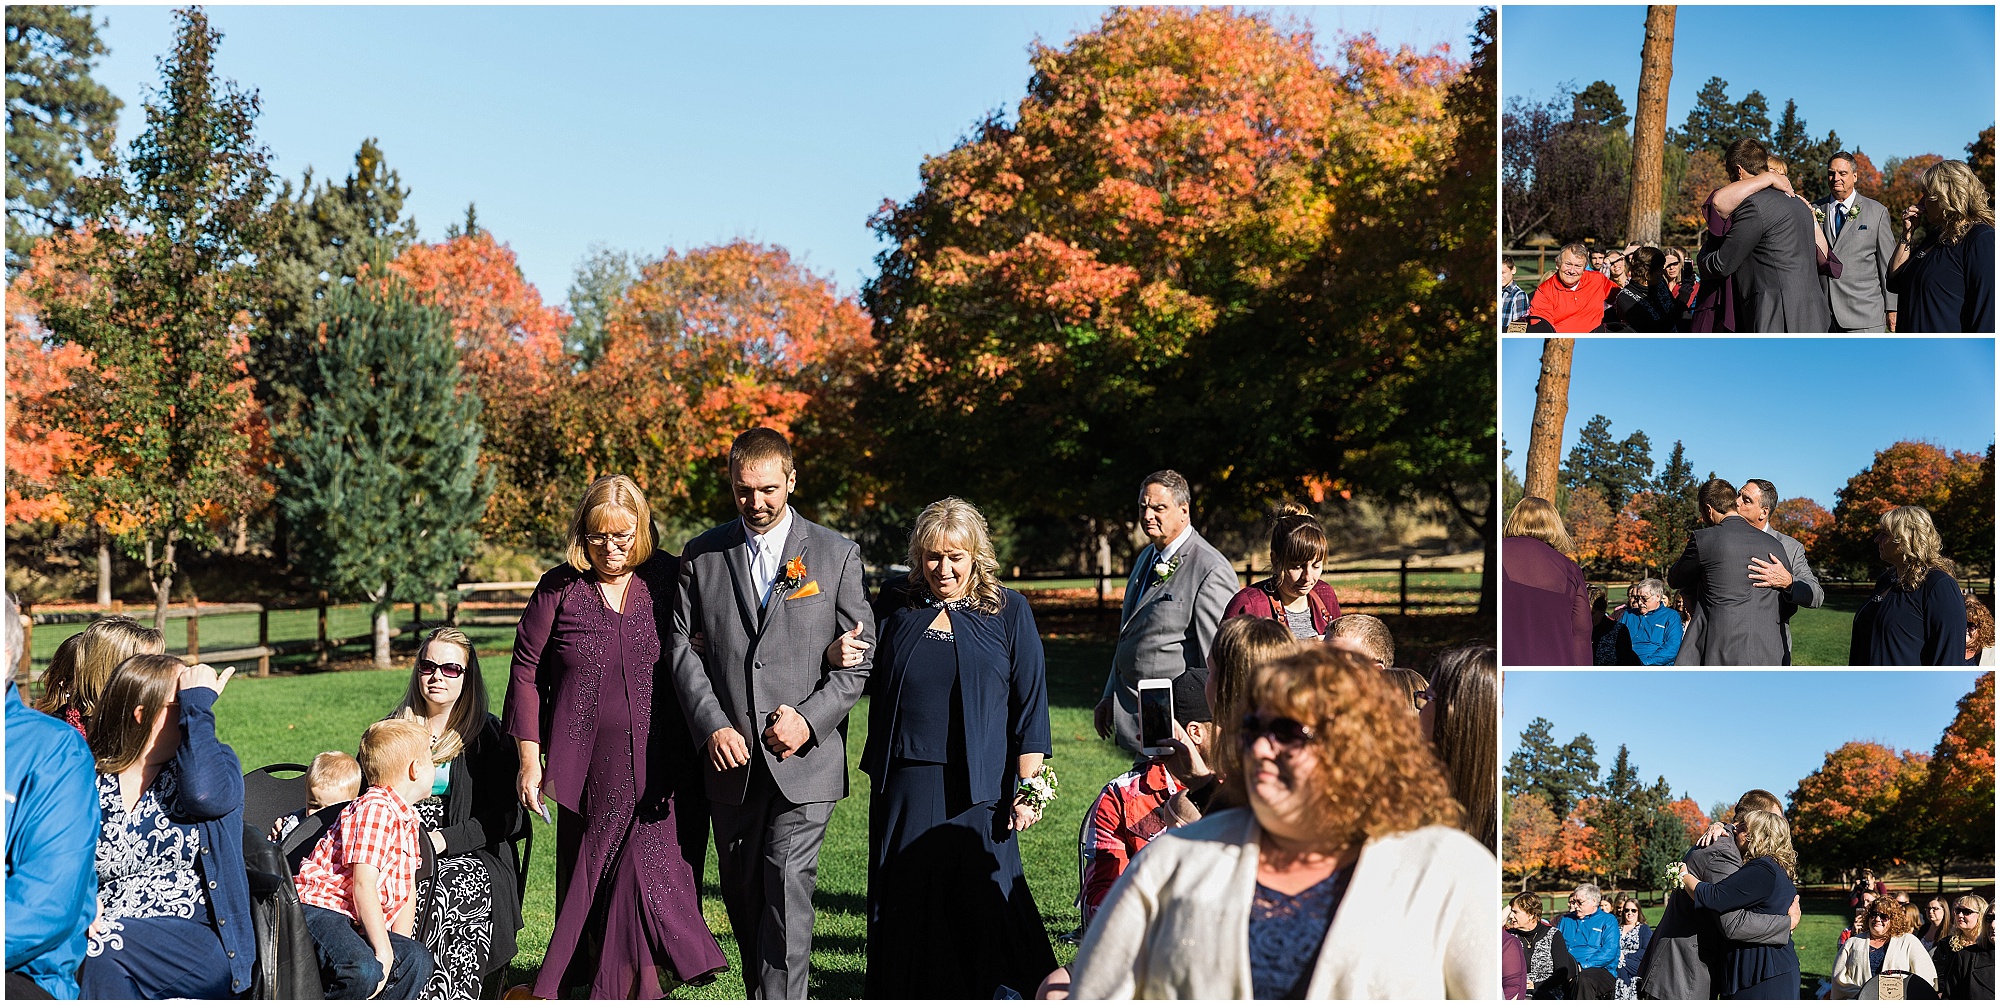 The groom walks down the aisle with his mother and mother of the bride at an outdoor wedding at Hollinshead Park in Bend, Oregon. | Erica Swantek Photography